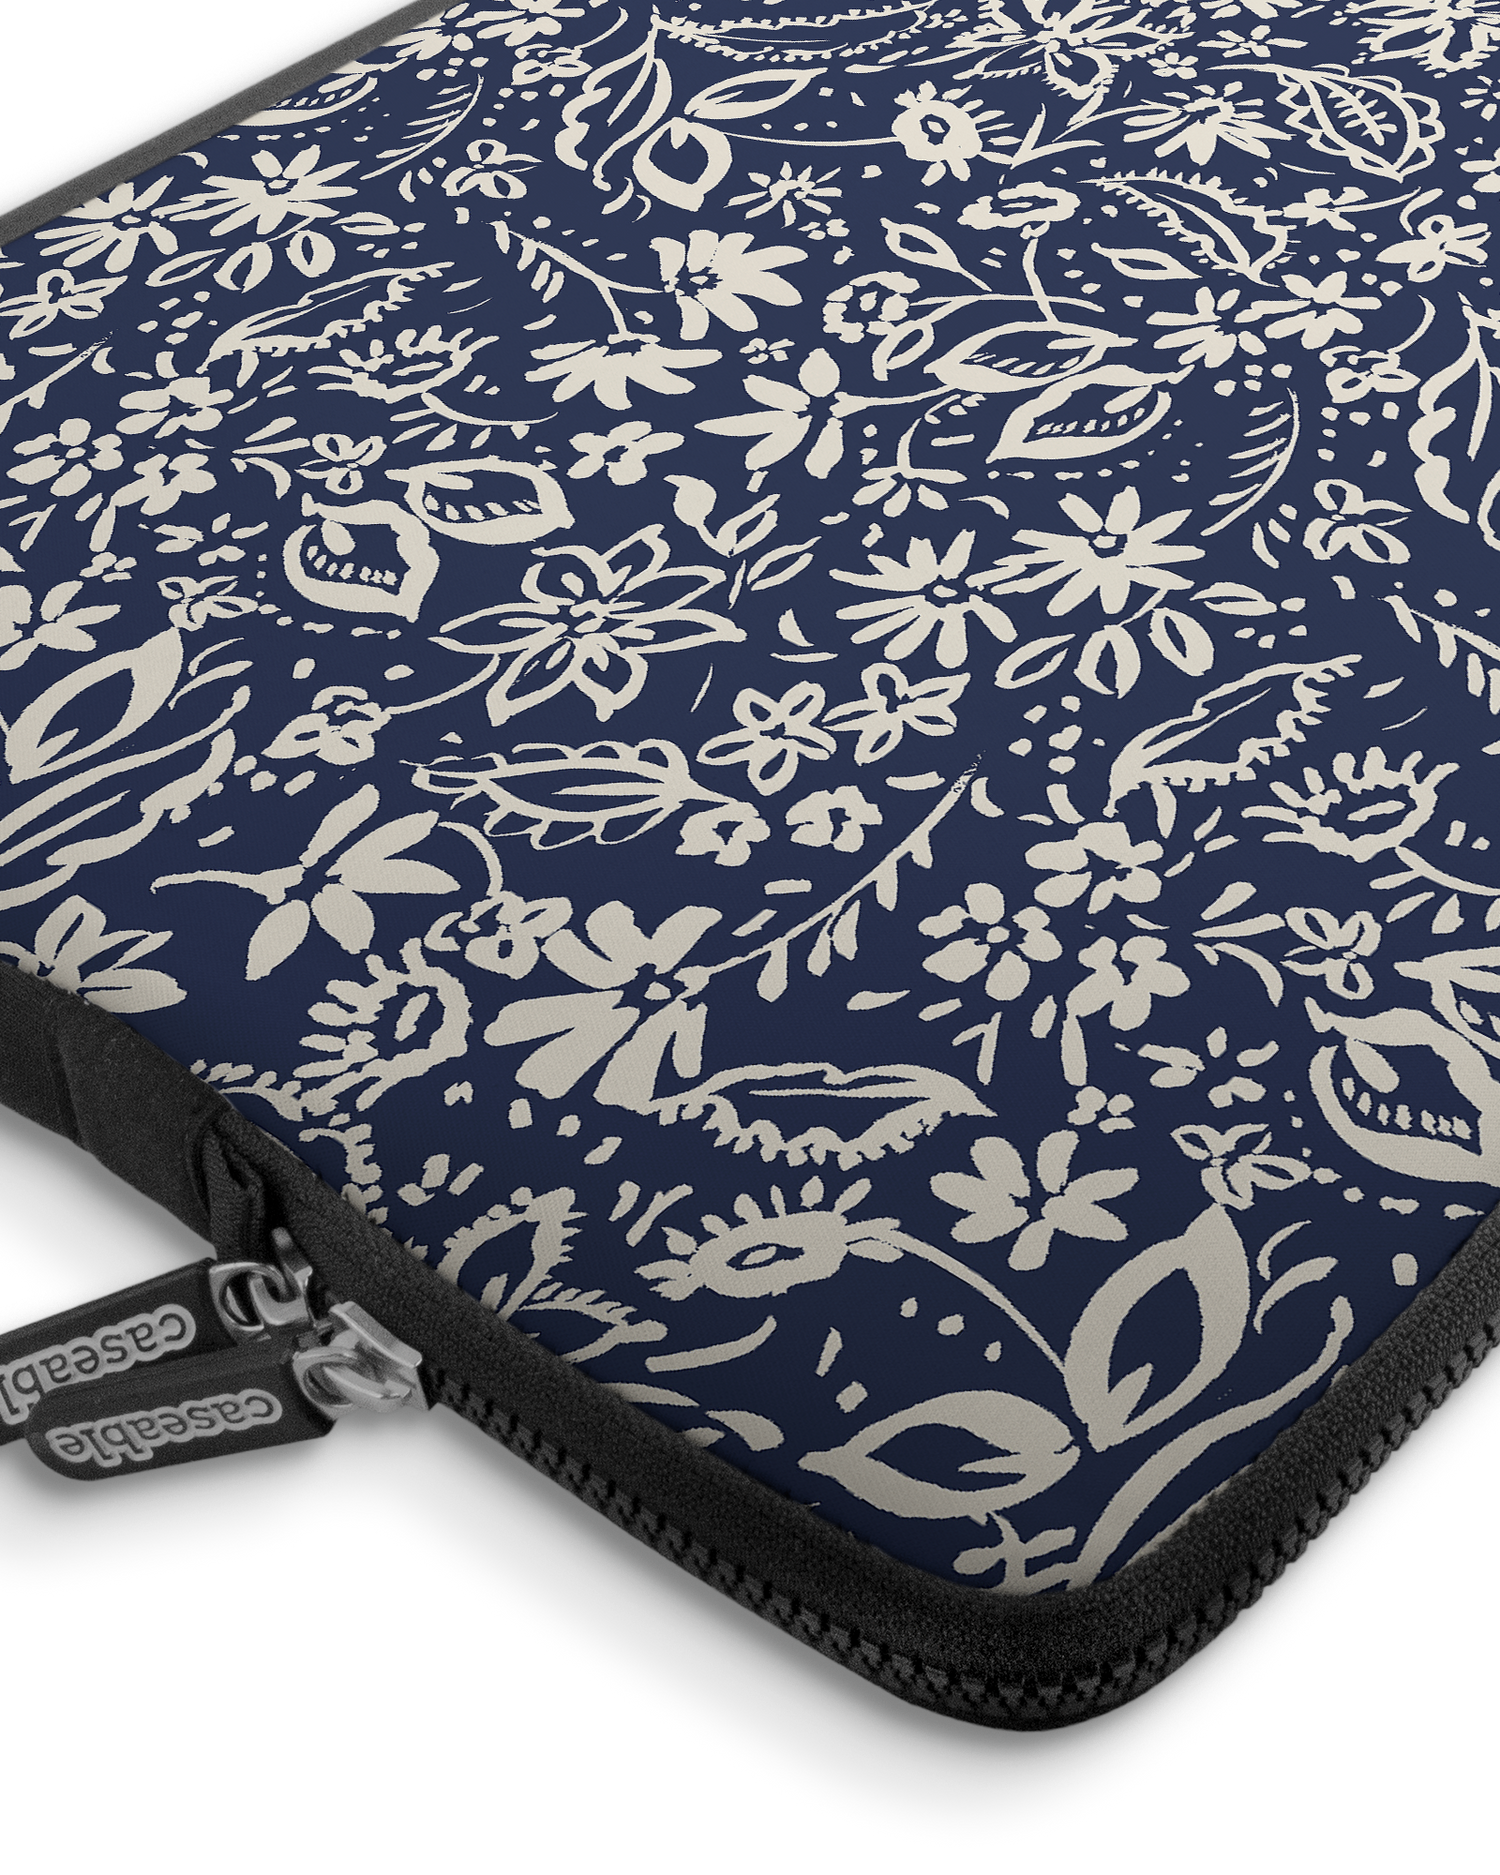 Ditsy Blue Paisley Premium Laptop Bag 17 inch with device inside